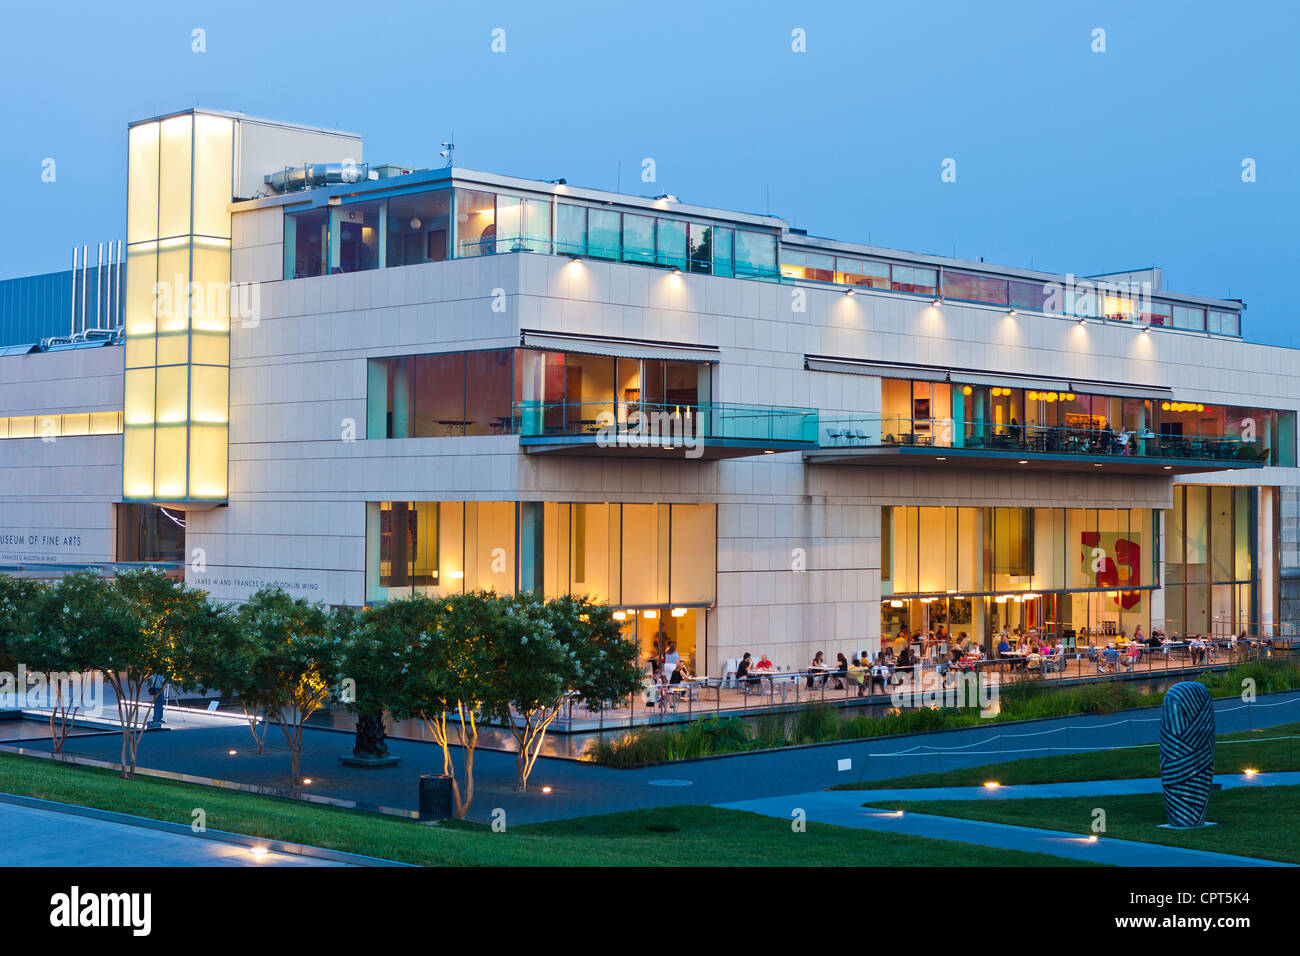 The Virginia Museum Of Fine Arts At Night With People Eating And Drinking On The Patio. Stock Photo